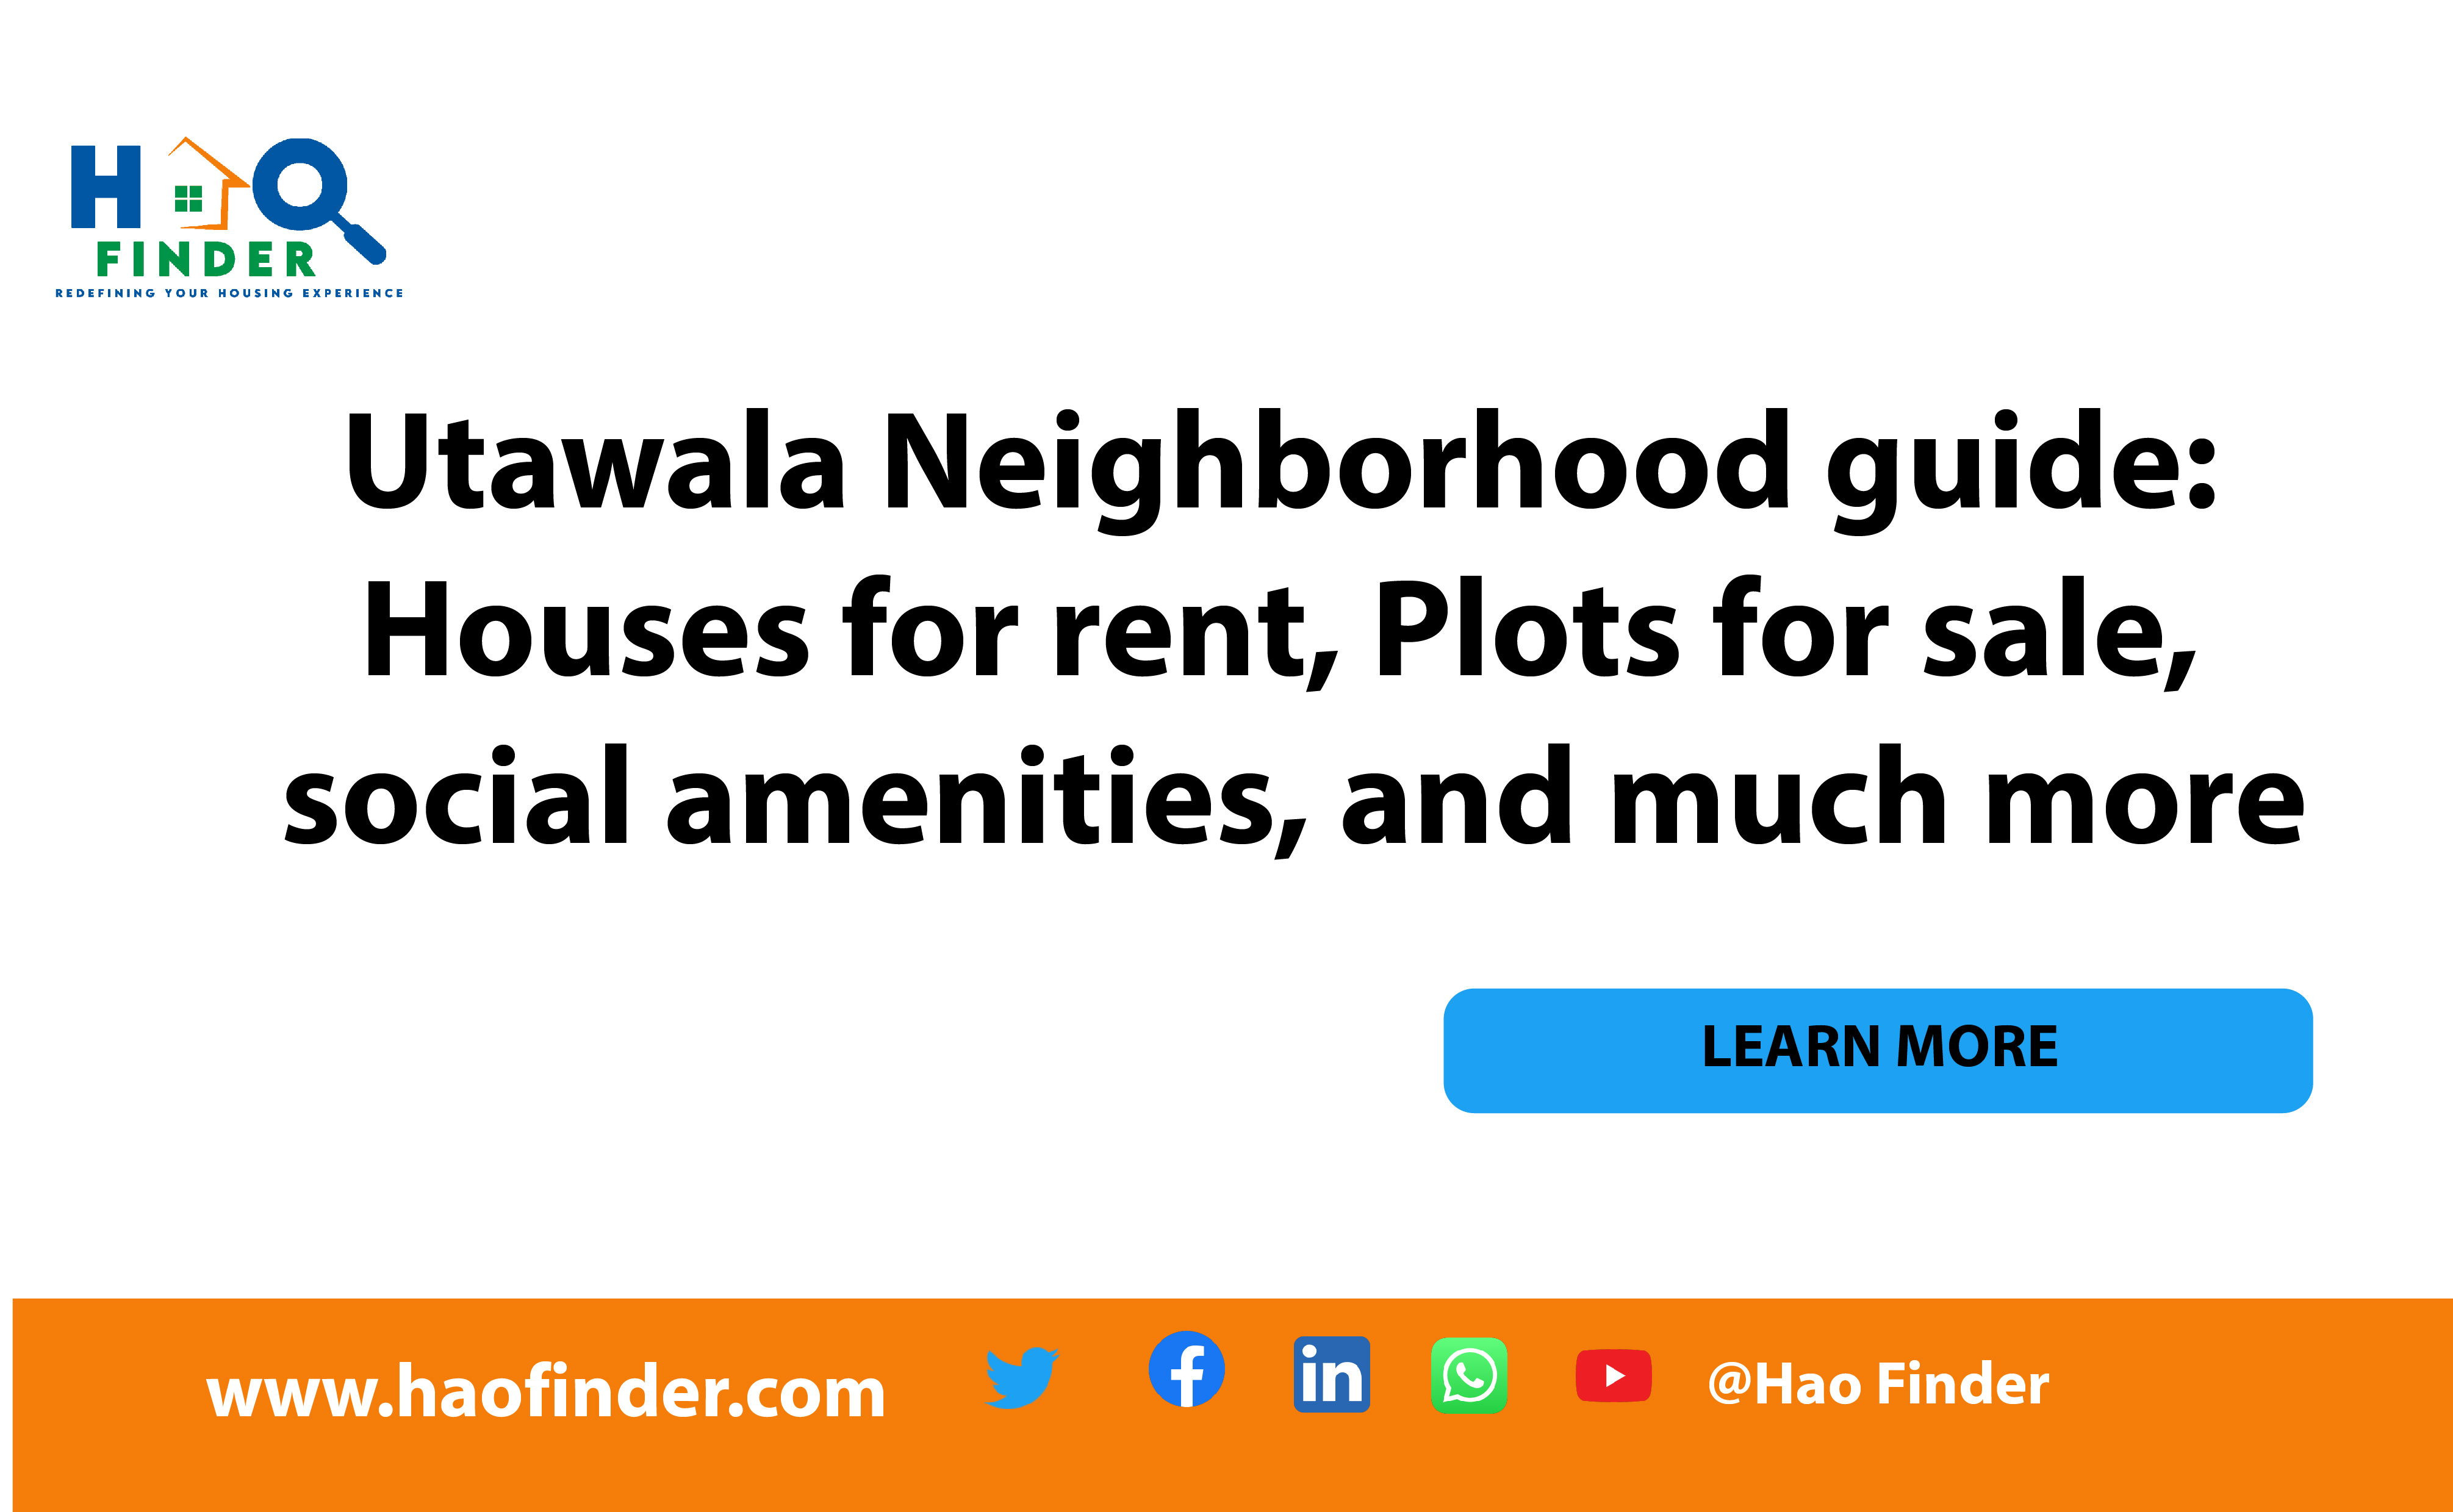 Utawala Neighborhood guide: heights for rent, social amenities, and much more